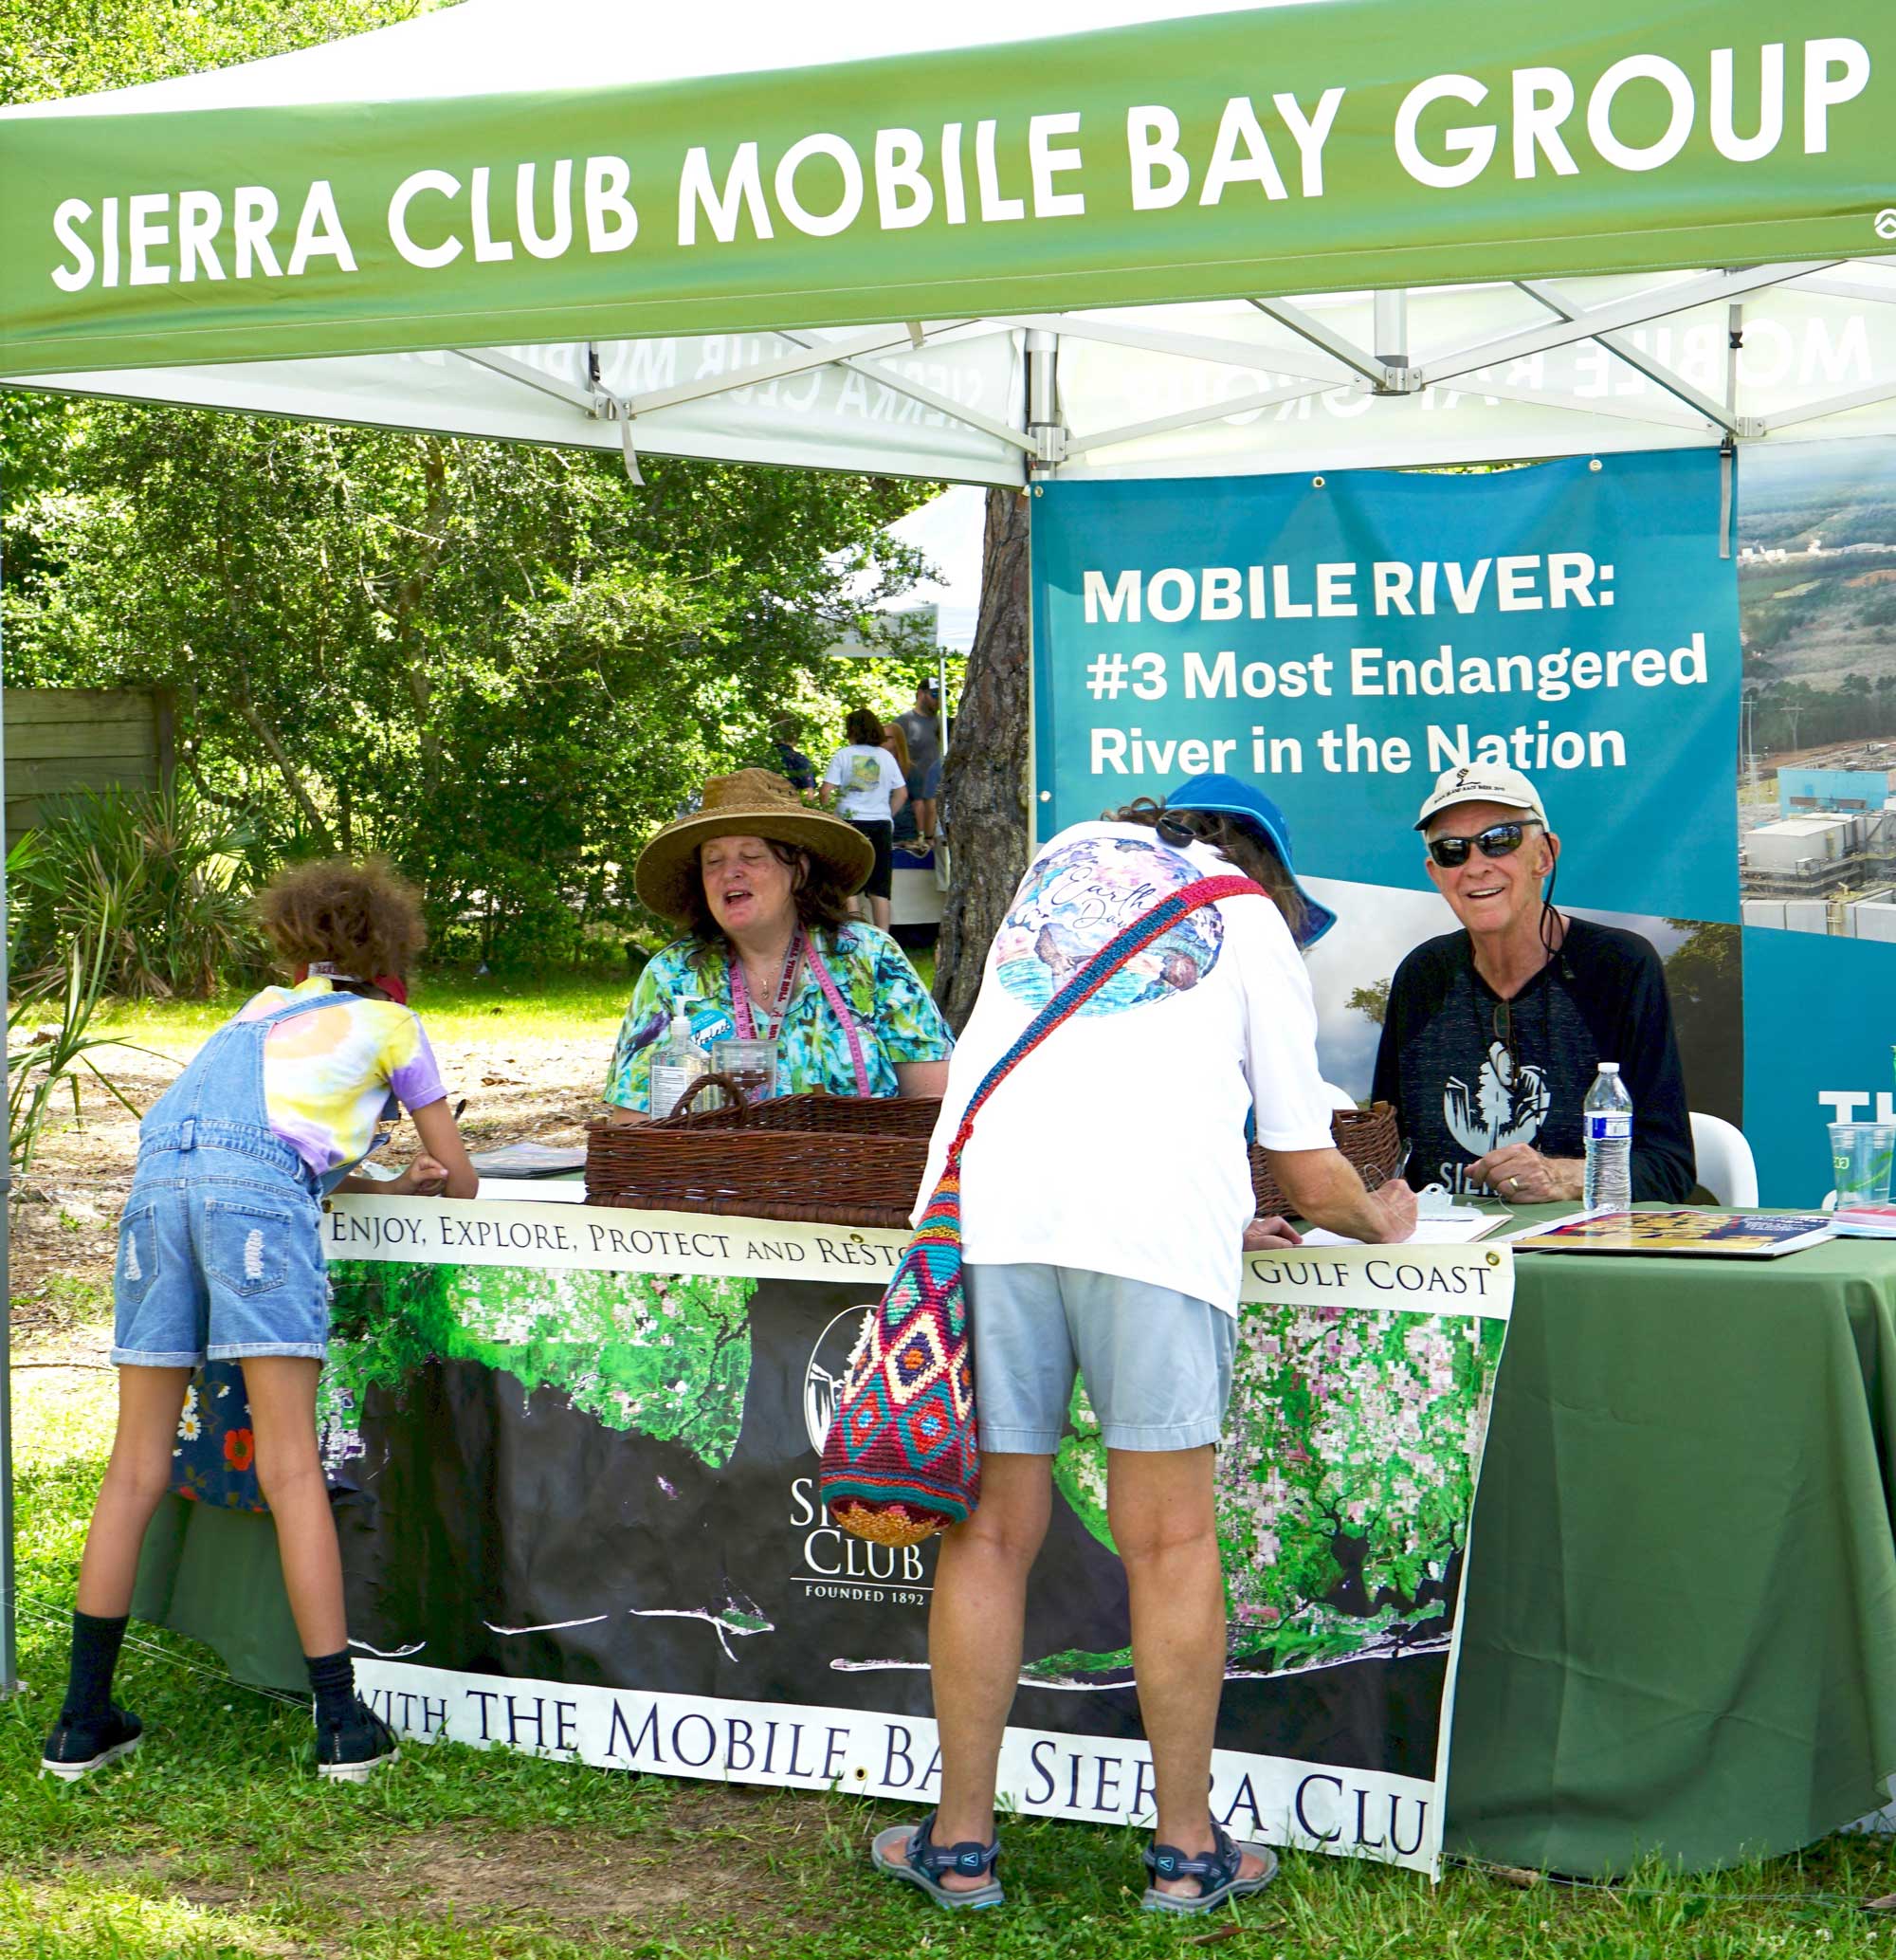 Sierra Club representatives at the 2022 Earth Day Event in Mobile, Alabama